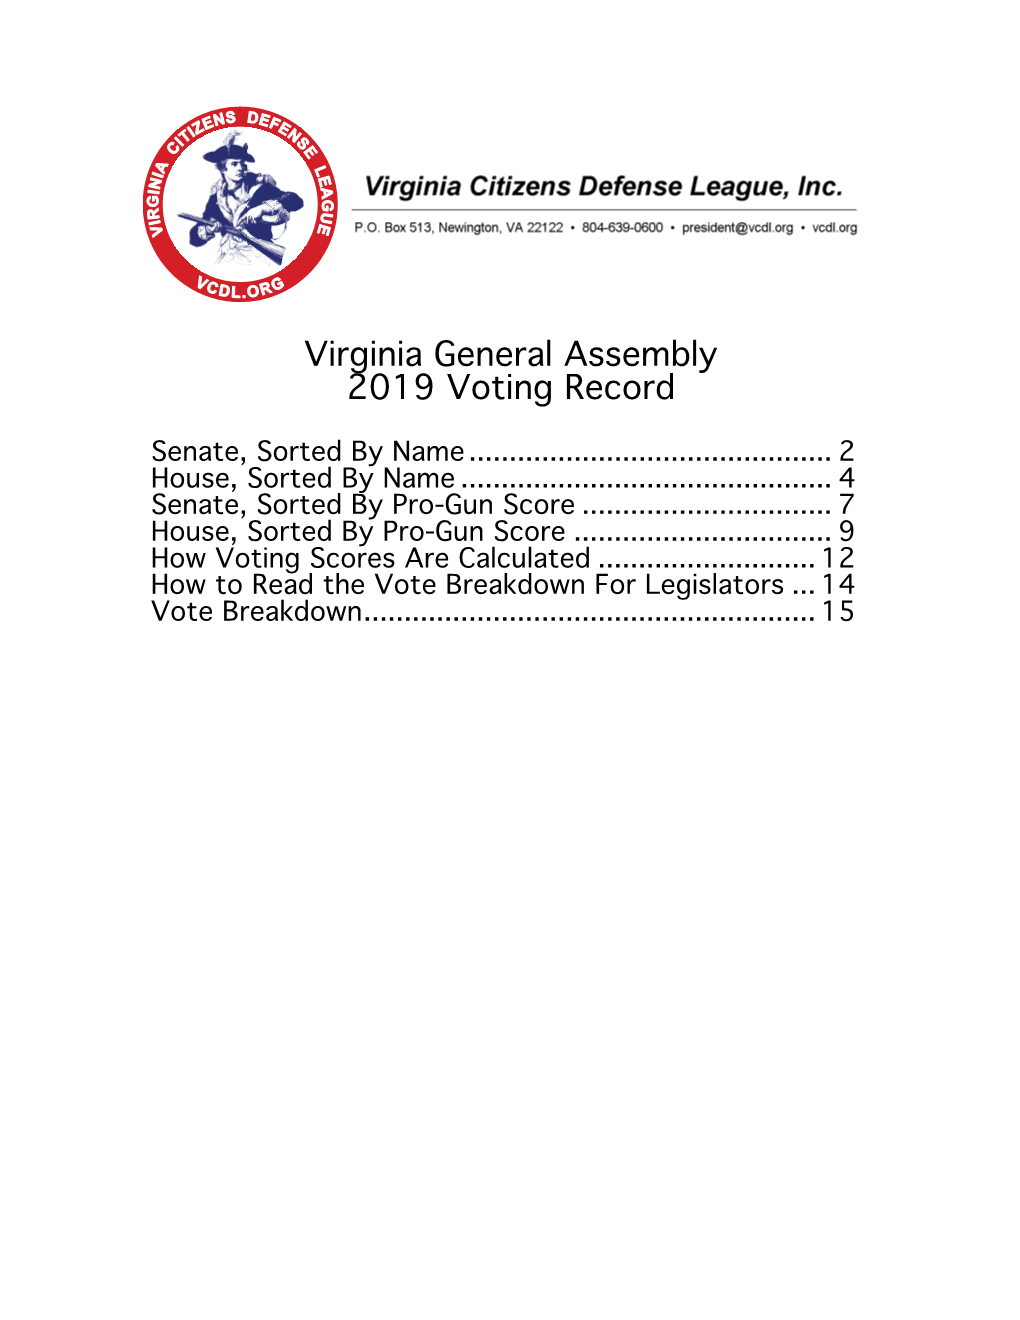 Virginia General Assembly 2019 Voting Record